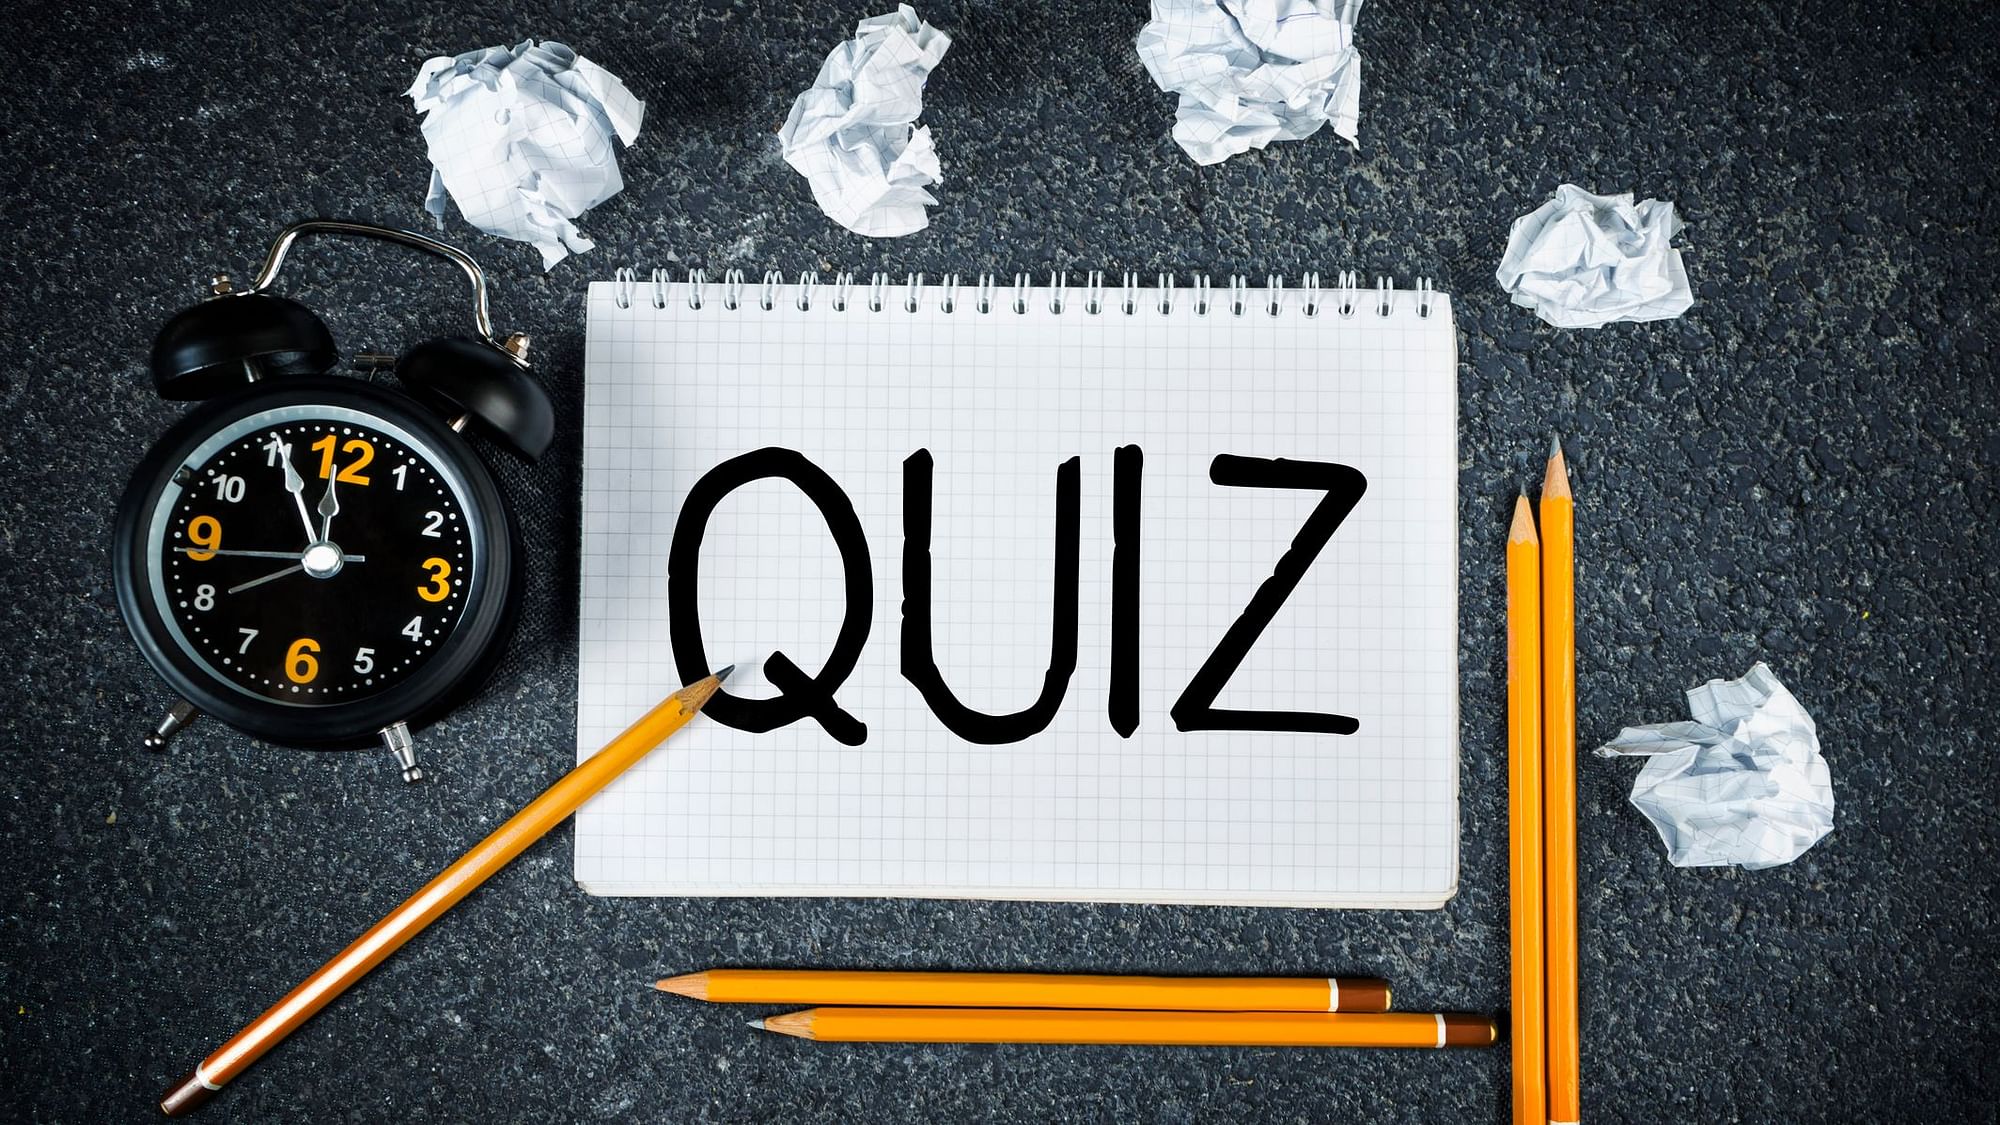 Find out the questions for today’s quiz.